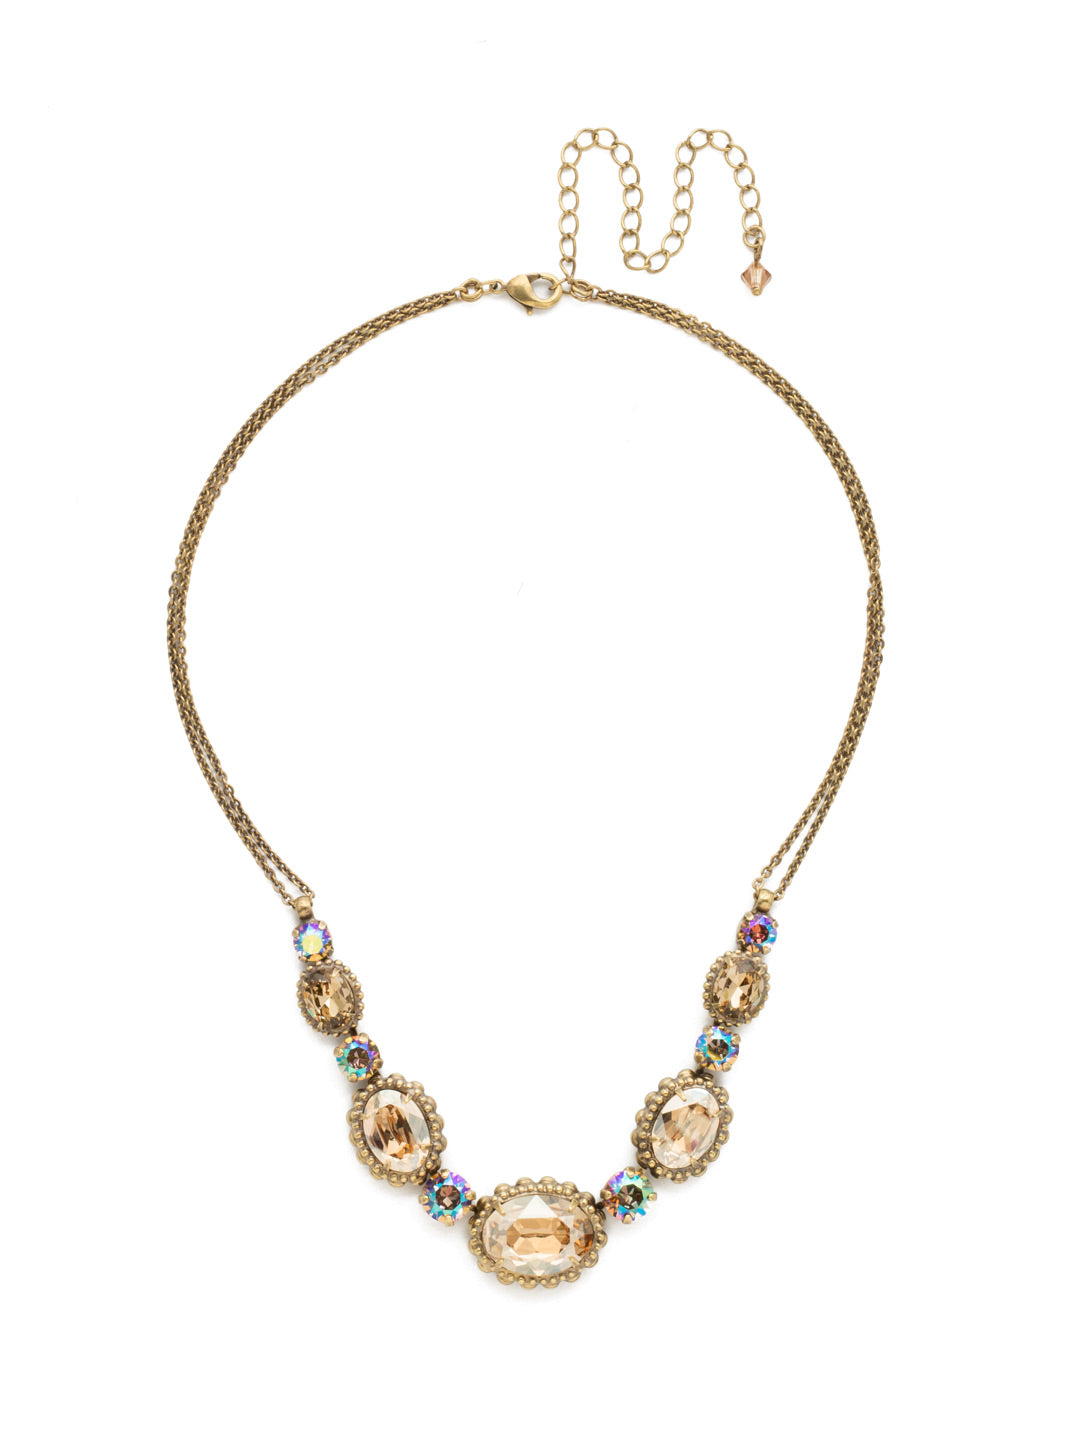 Camellia Necklace - NDQ10AGNT - <p>A delicate double chain adds subtle detail to this charming style. Five oval crystals with decorative metal edging are highlighted by petite round stones for a dynamic, dazzling look. From Sorrelli's Neutral Territory collection in our Antique Gold-tone finish.</p>